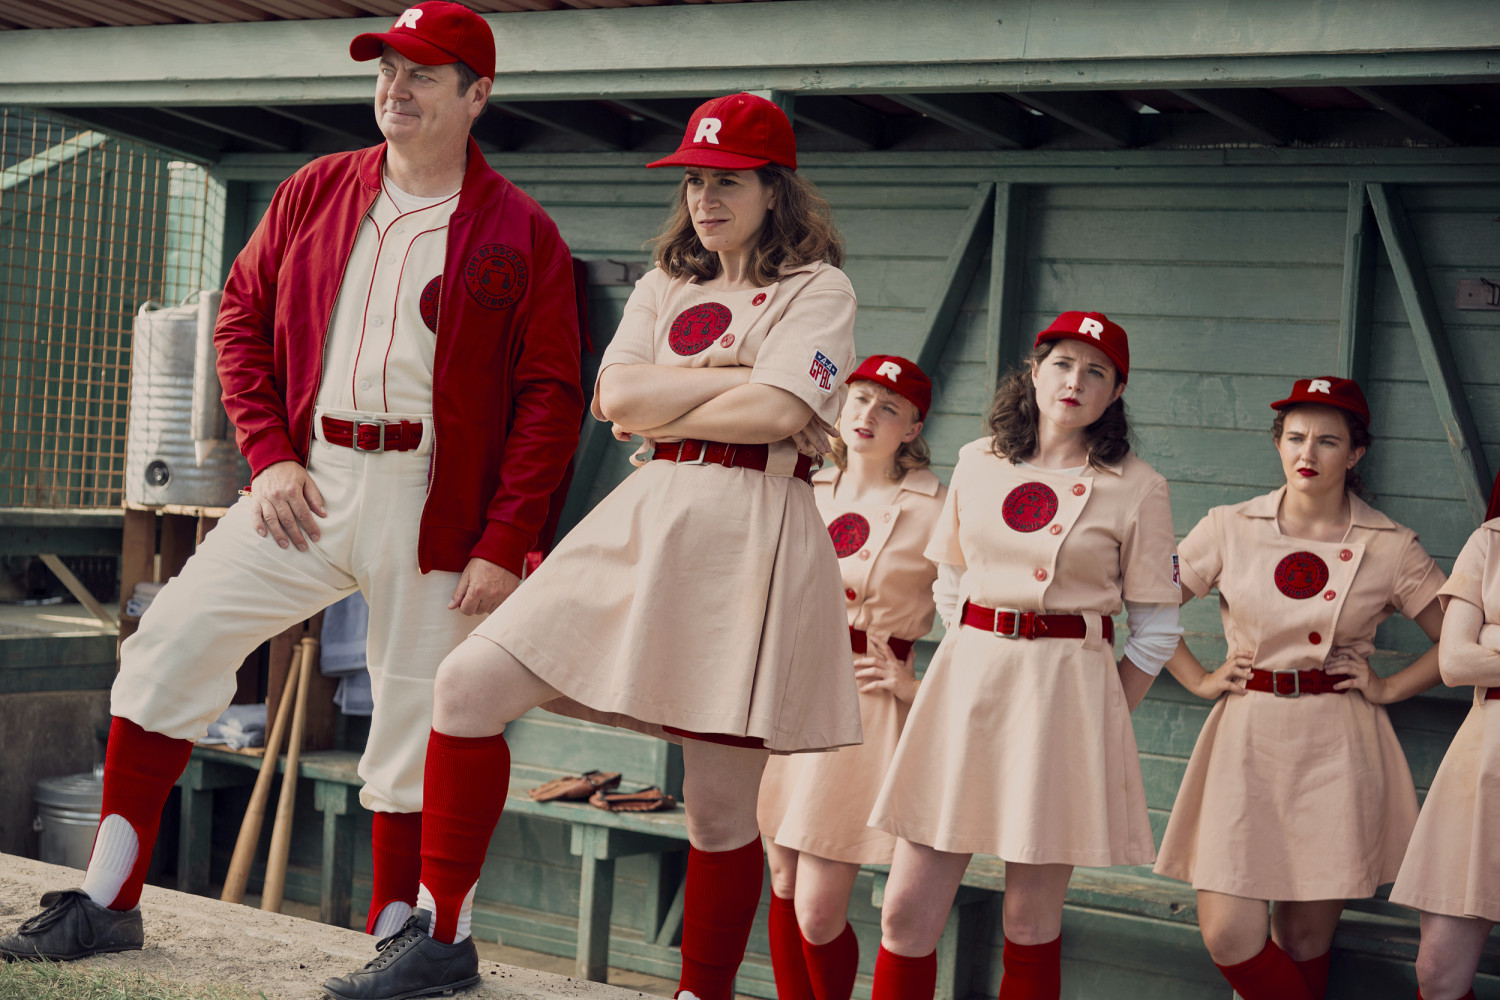 A League of Their Own TV series has been canceled, Amazon confirms